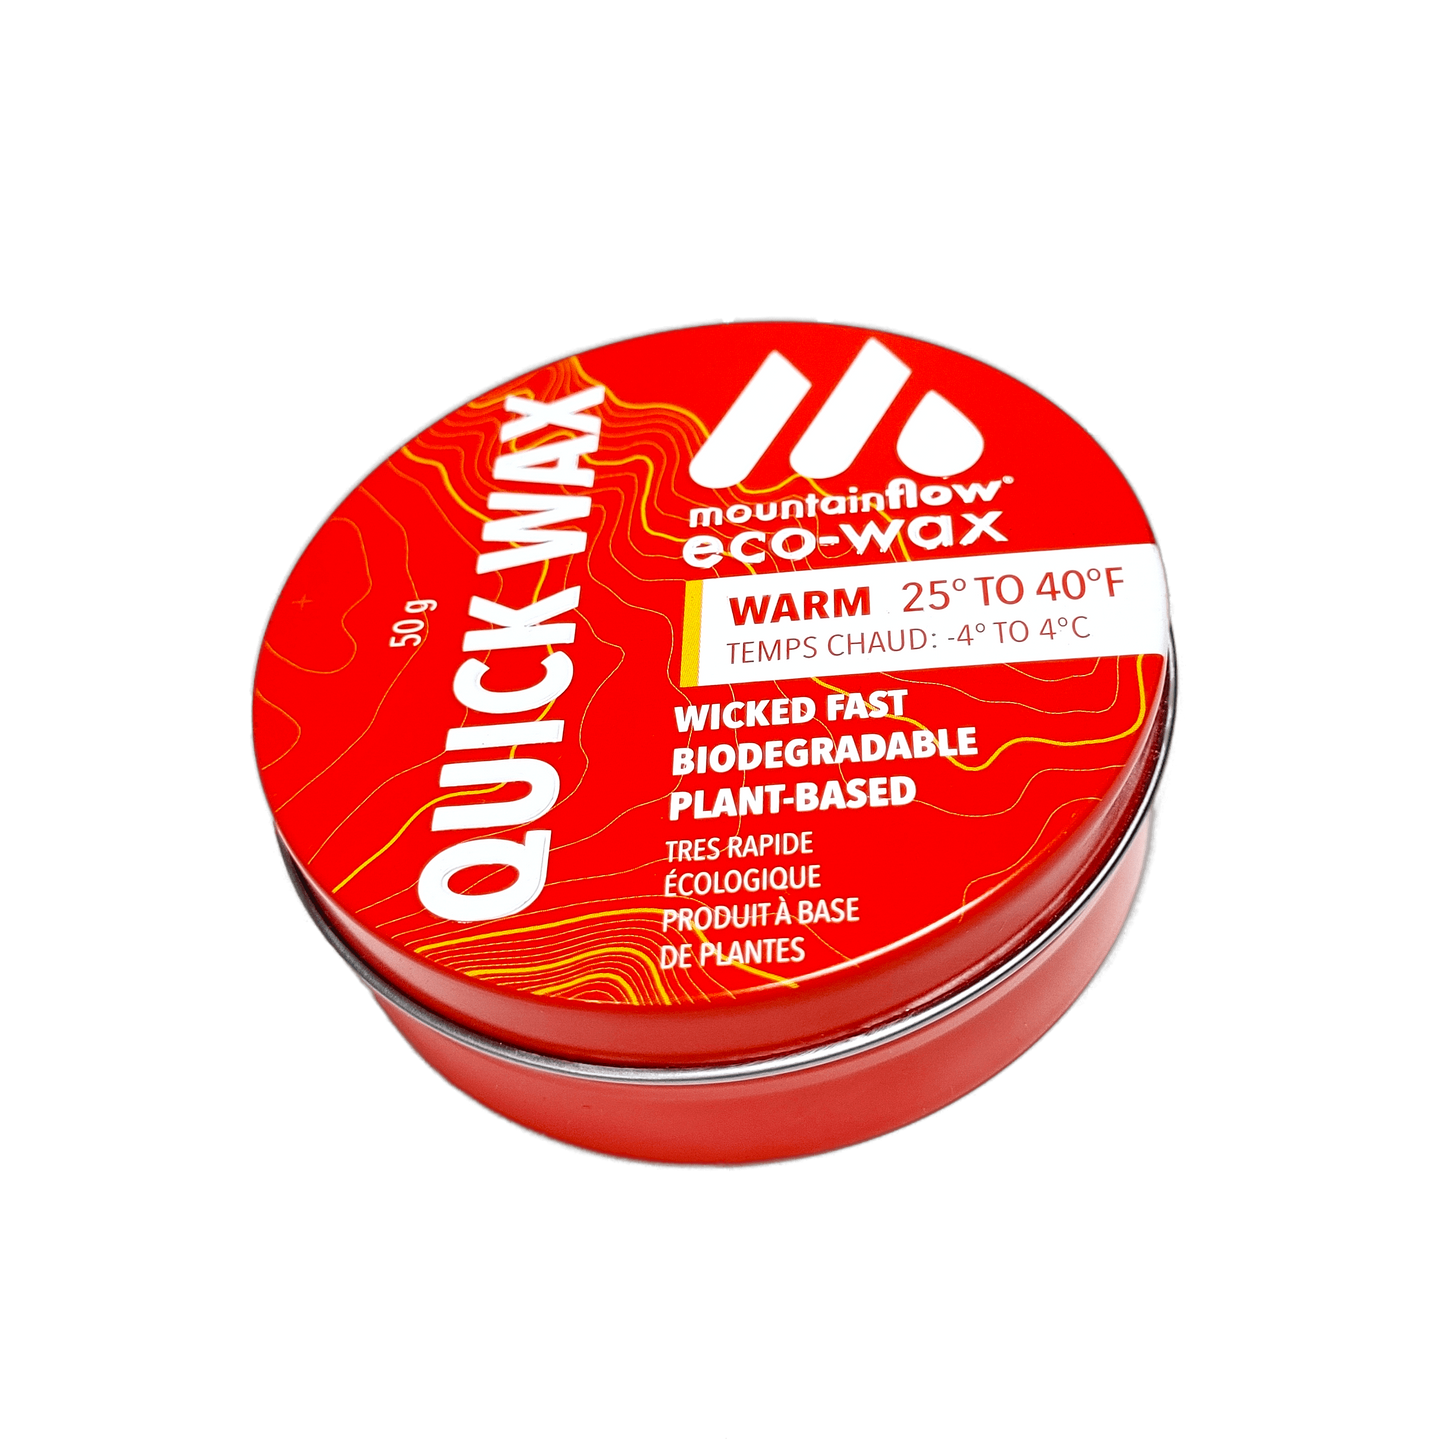 A product picture of the mountainFLOW eco-wax Quick Wax Warm